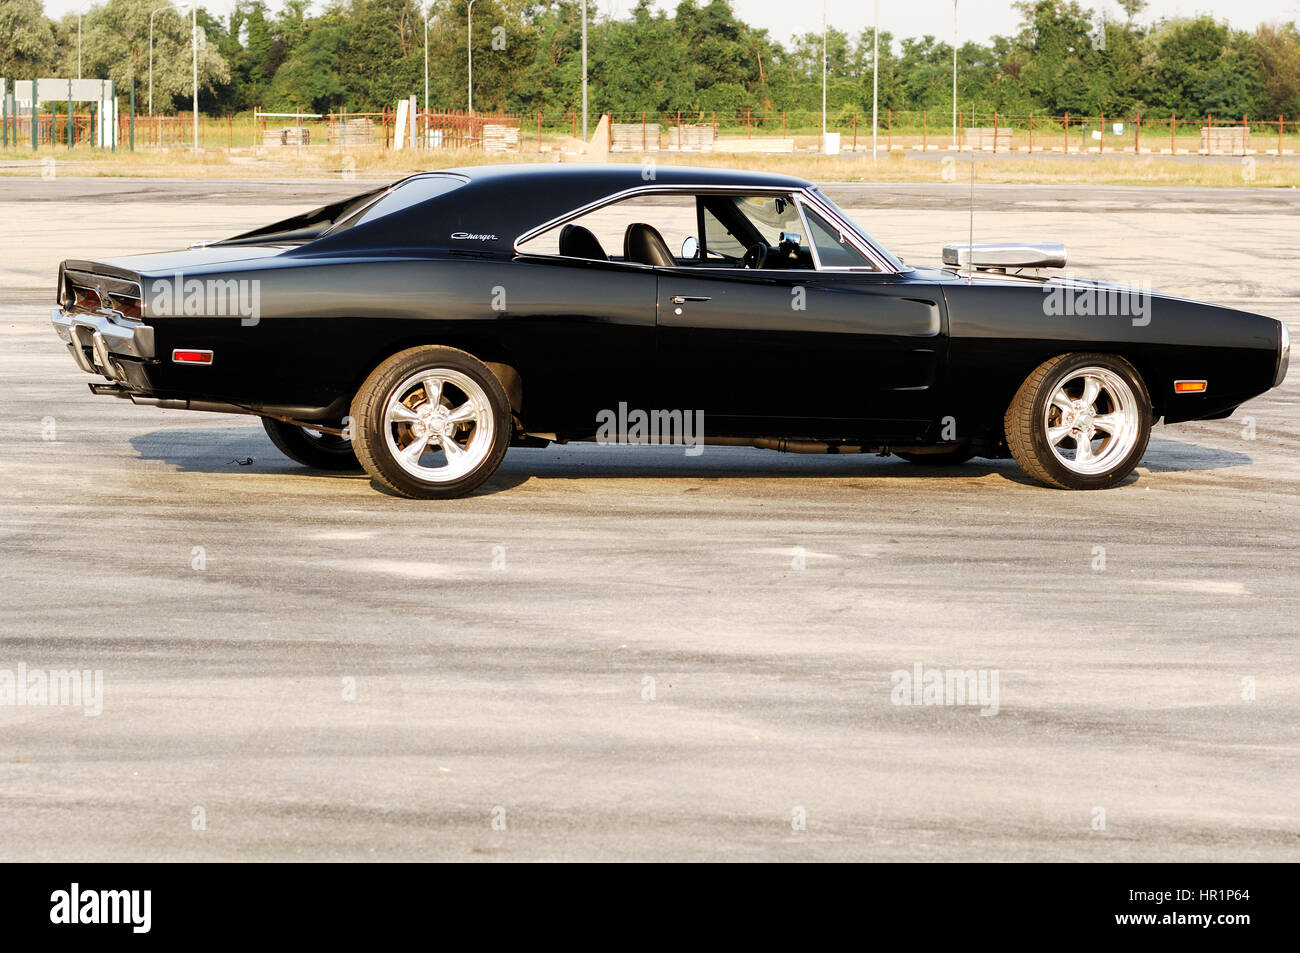 1970 DODGE CHARGER SCHNELL & WÜTEND; THE FAST AND THE FURIOUS 4  Stockfotografie - Alamy